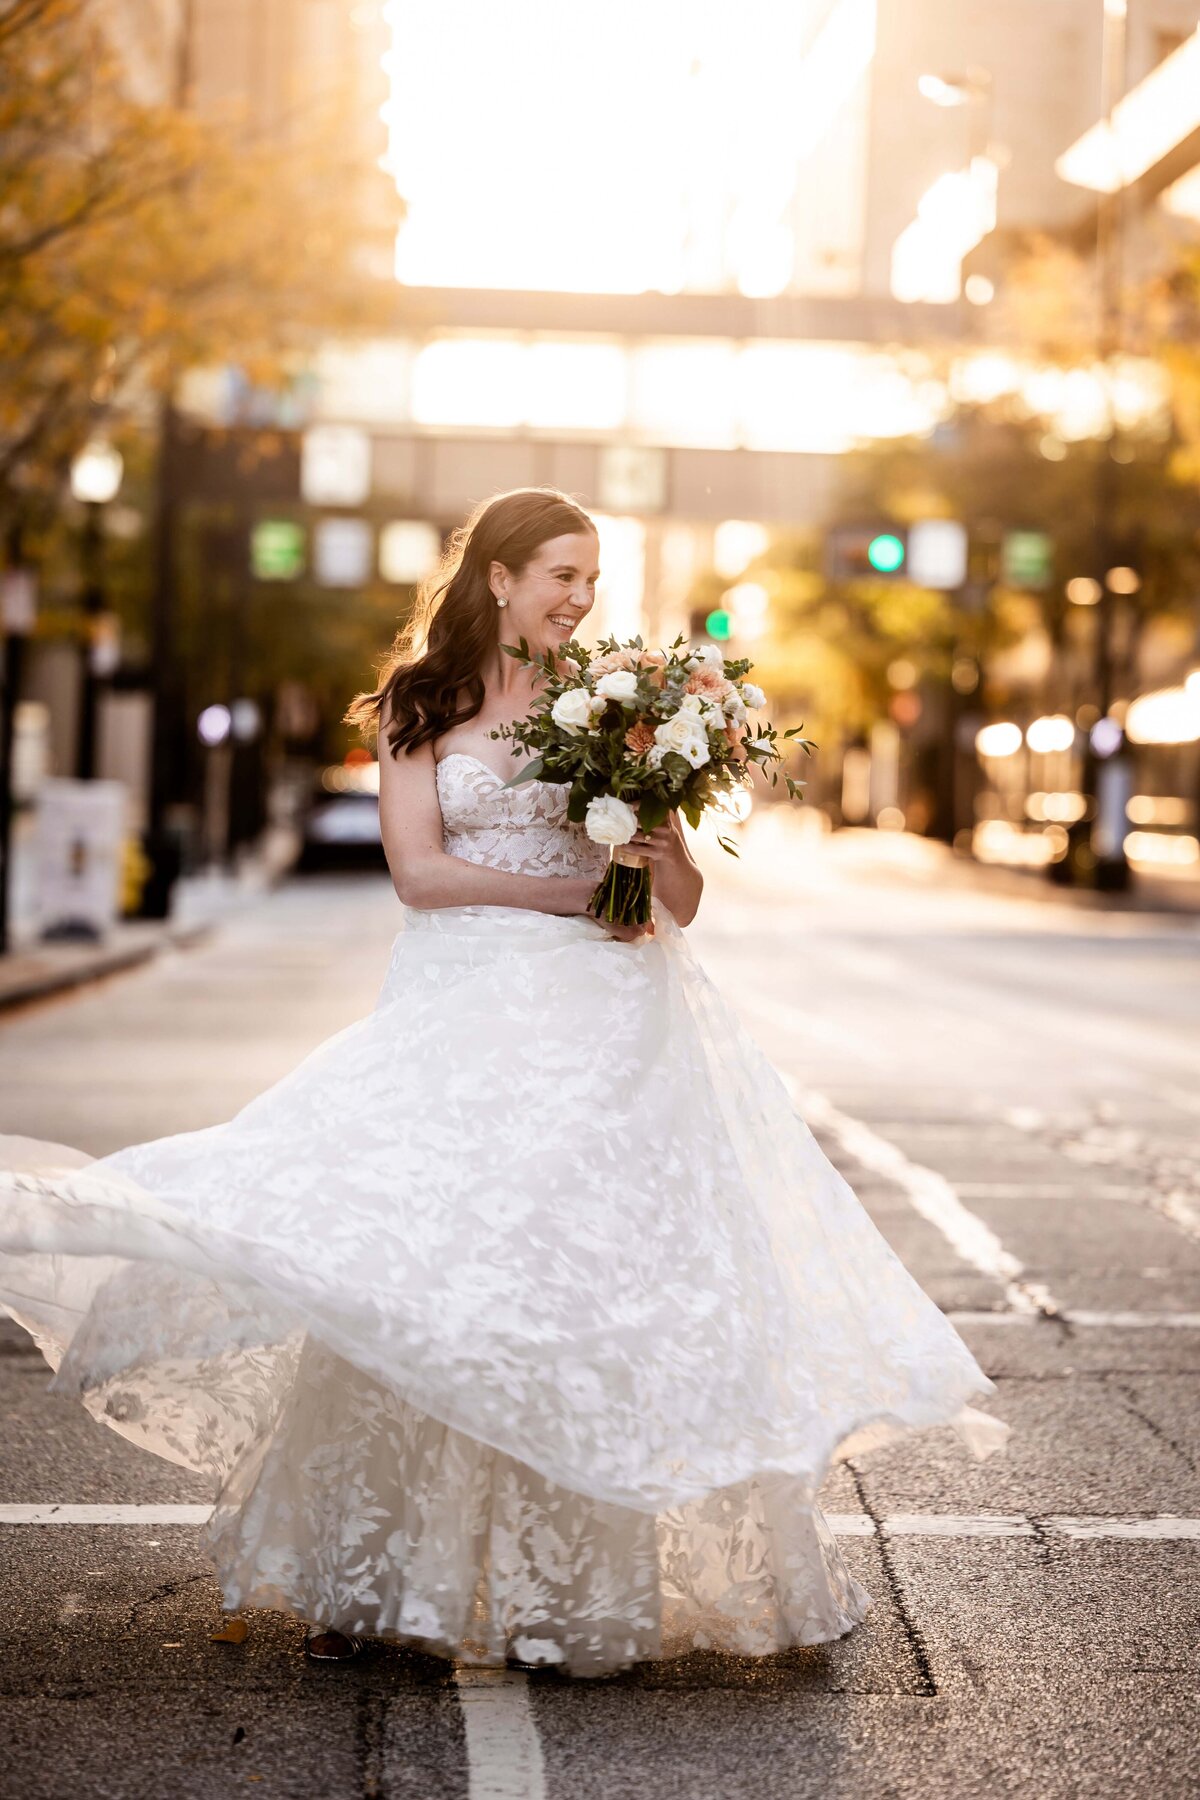 Embrace the joyous spirit of a bride dancing through the sunset-lit streets of Cincinnati in this captivating bridal portrait. As the city basks in the golden hour glow, this image captures the exhilarating moment of a bride celebrating her wedding day with spontaneous street dancing. This photo not only showcases her stunning gown and blissful smile but also embodies the vibrant energy of Cincinnati, making it an ideal inspiration for couples planning a lively urban wedding. Perfect for those who dream of a wedding day filled with fun and city charm.